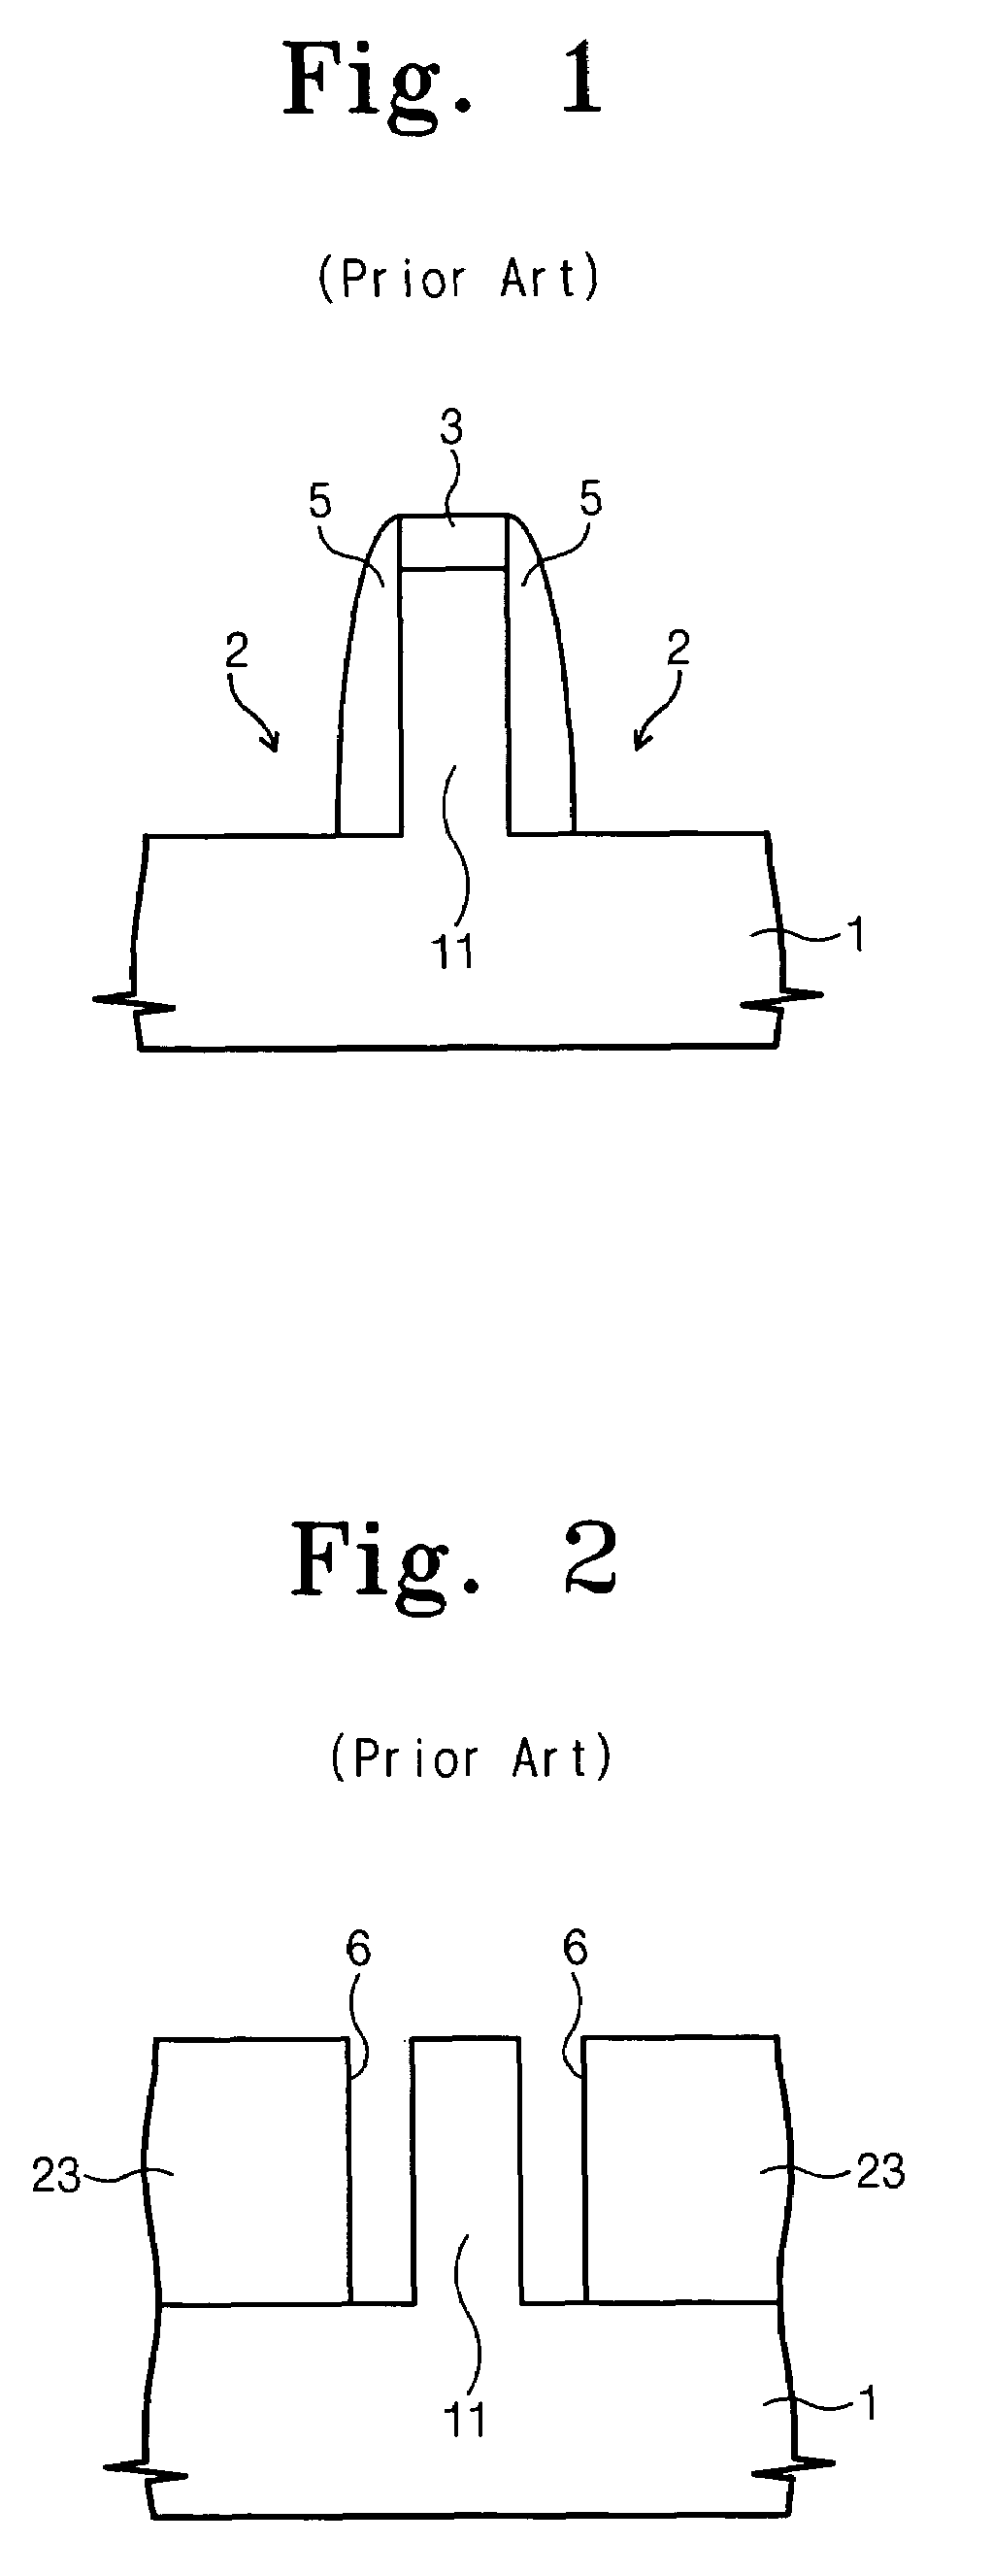 Fin field effect transistor device and method of fabricating the same